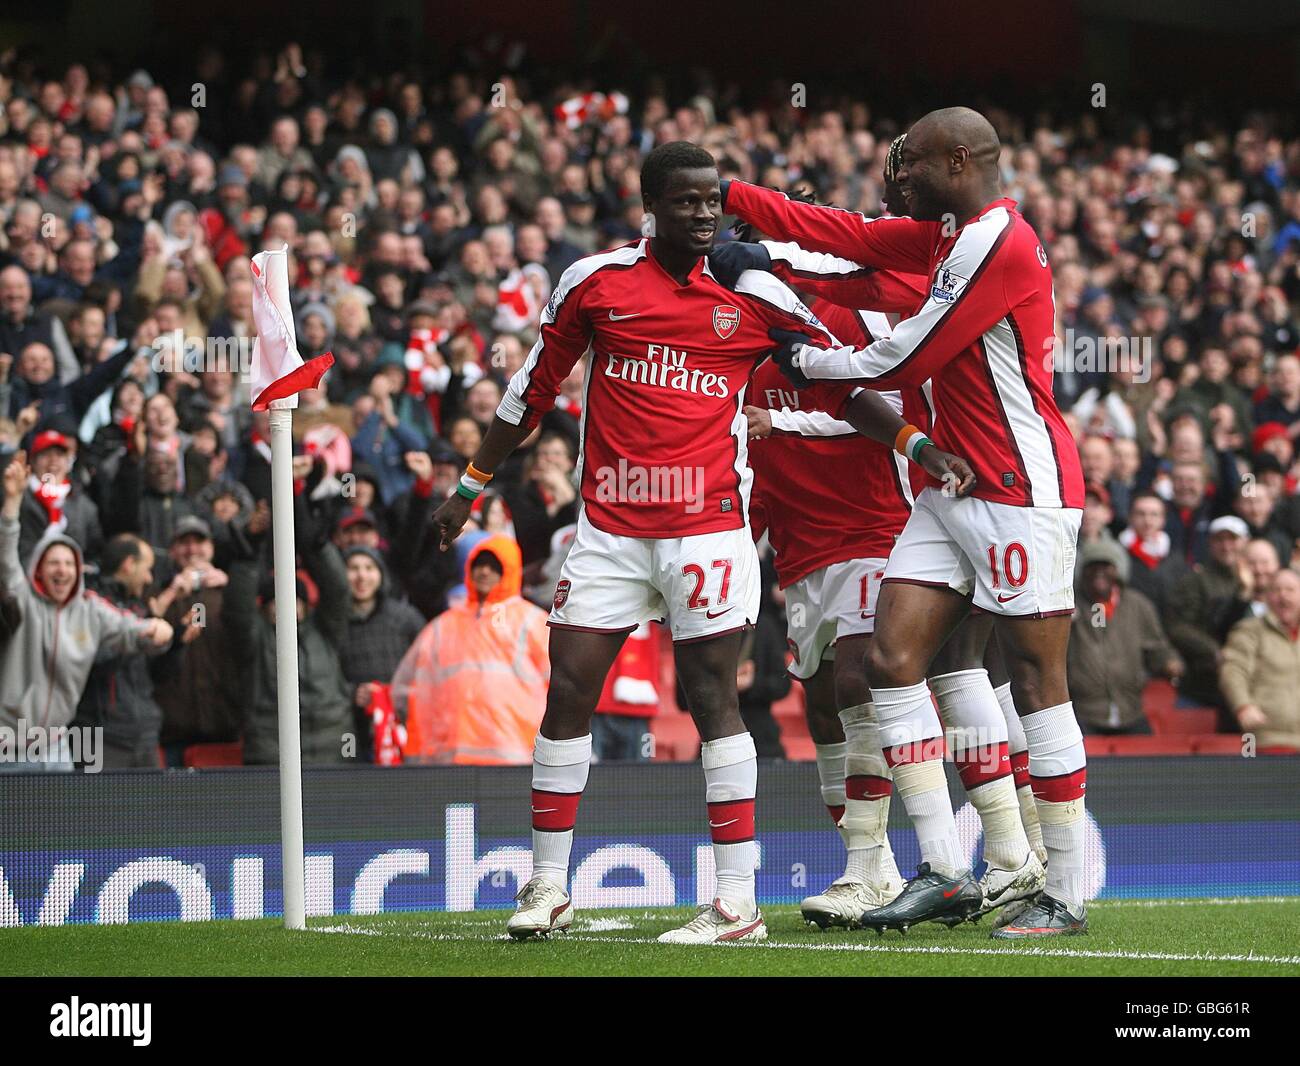 Arsenals Emmanuel Eboue Celebrates With The Emirates Cup High Resolution Stock Photography And Images Alamy